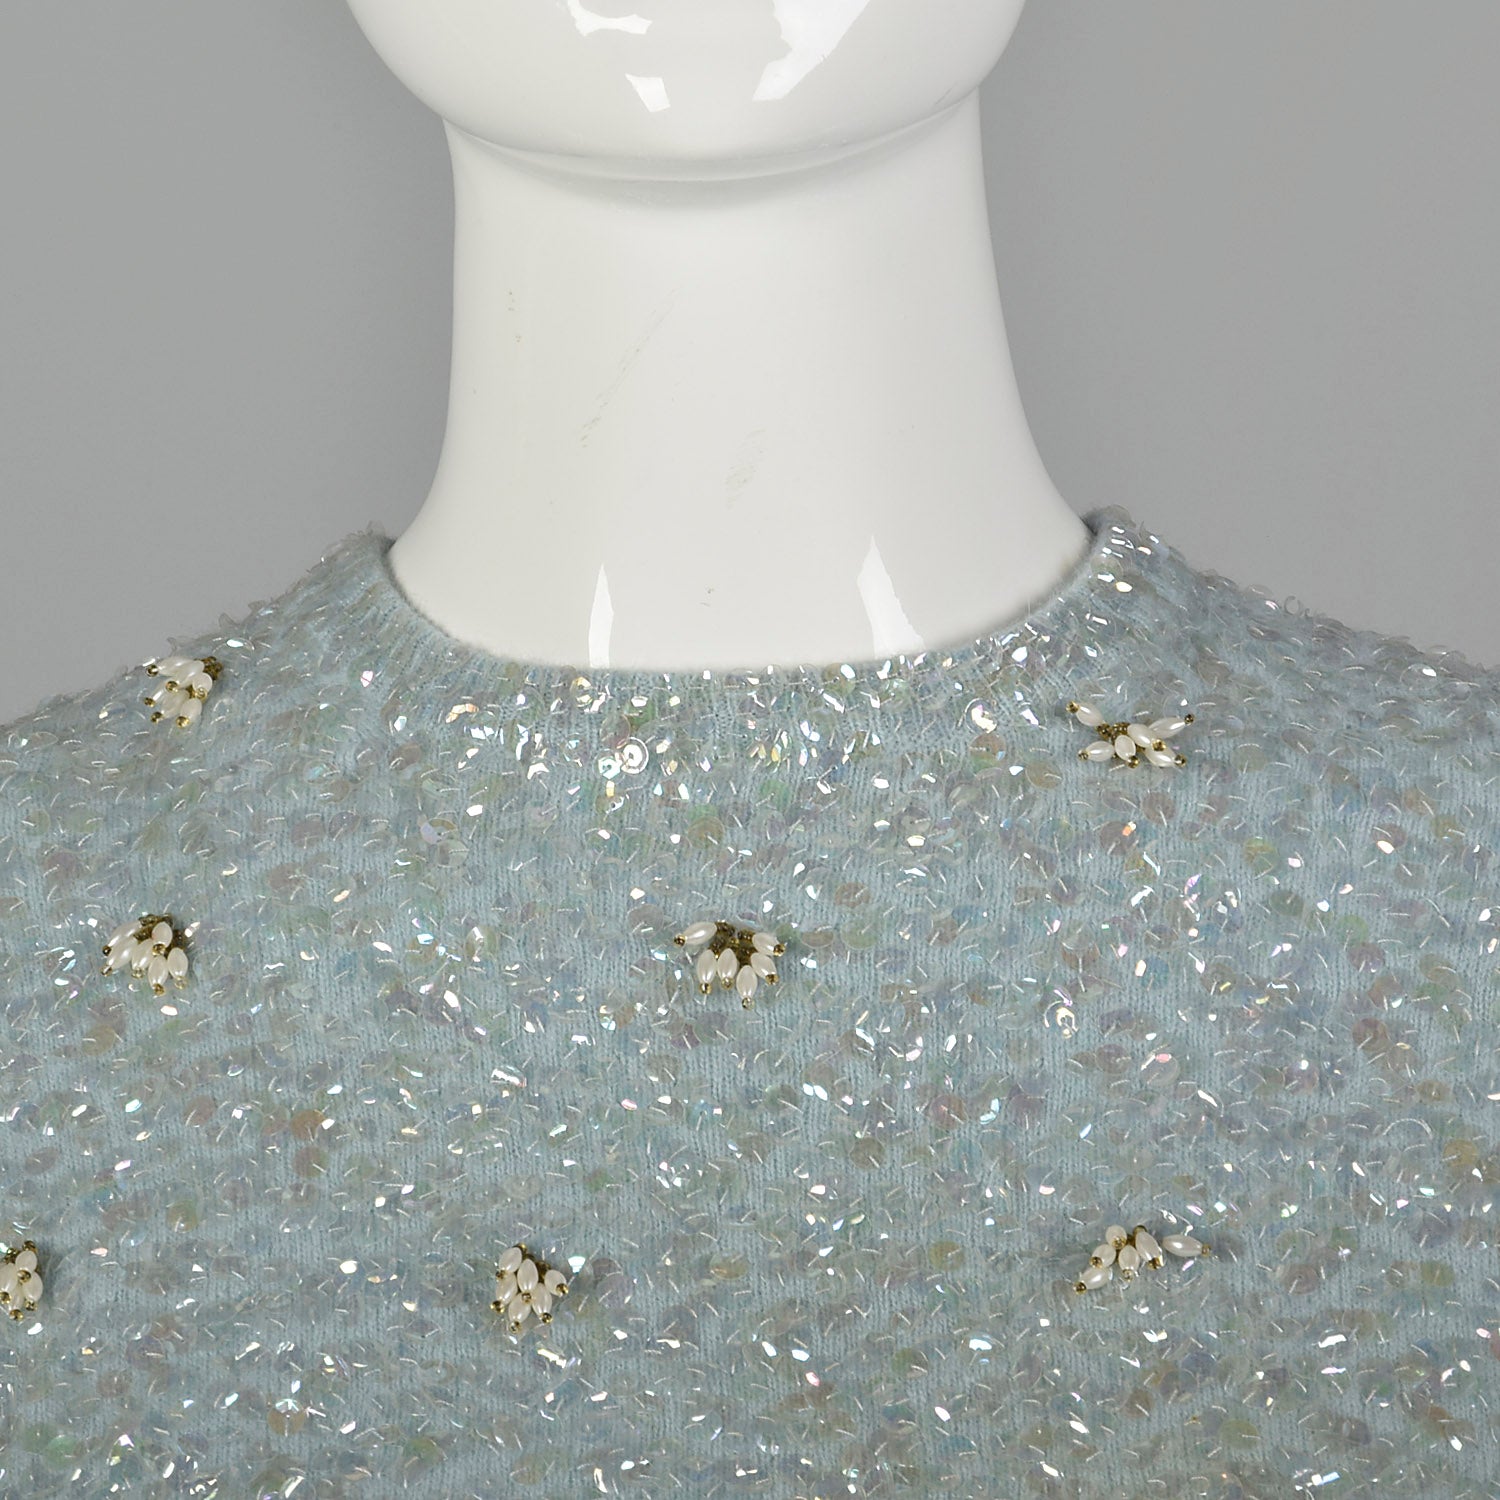 XS 1960s Fully Beaded and Sequined Blue Sweater